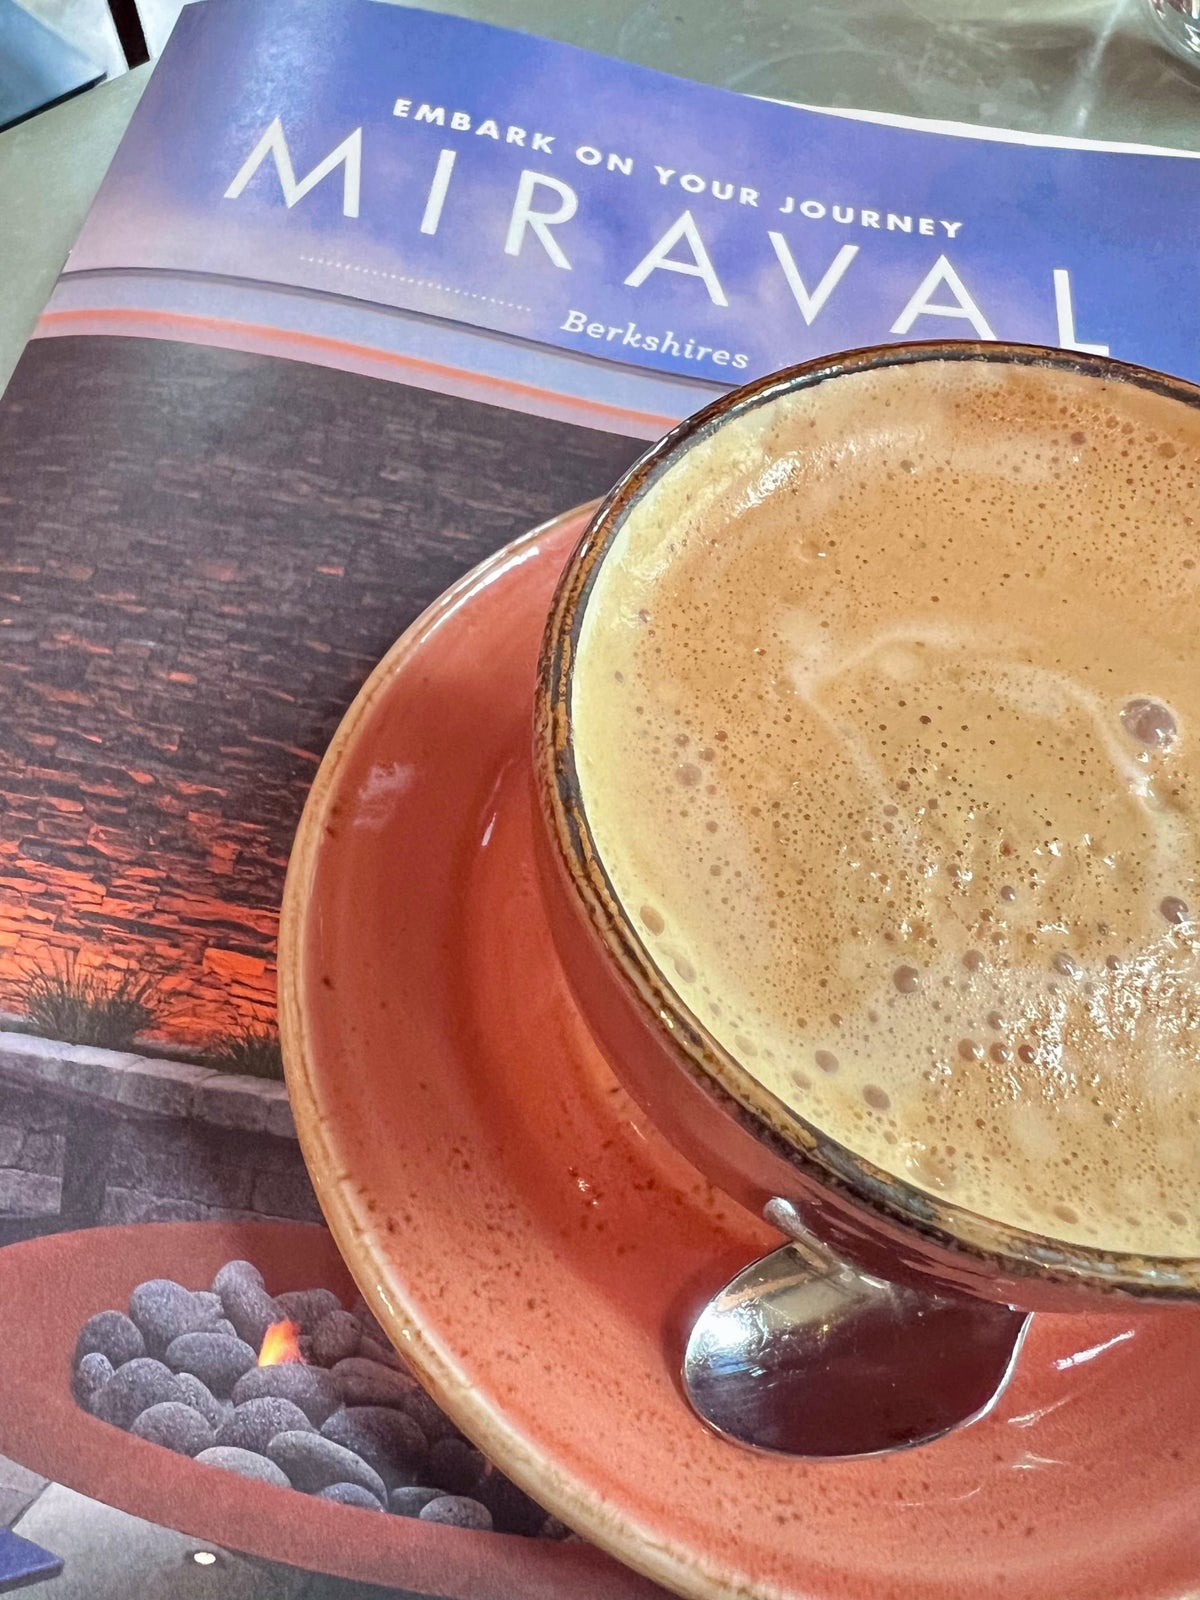 Miraval Berkshires daily schedule and coffee